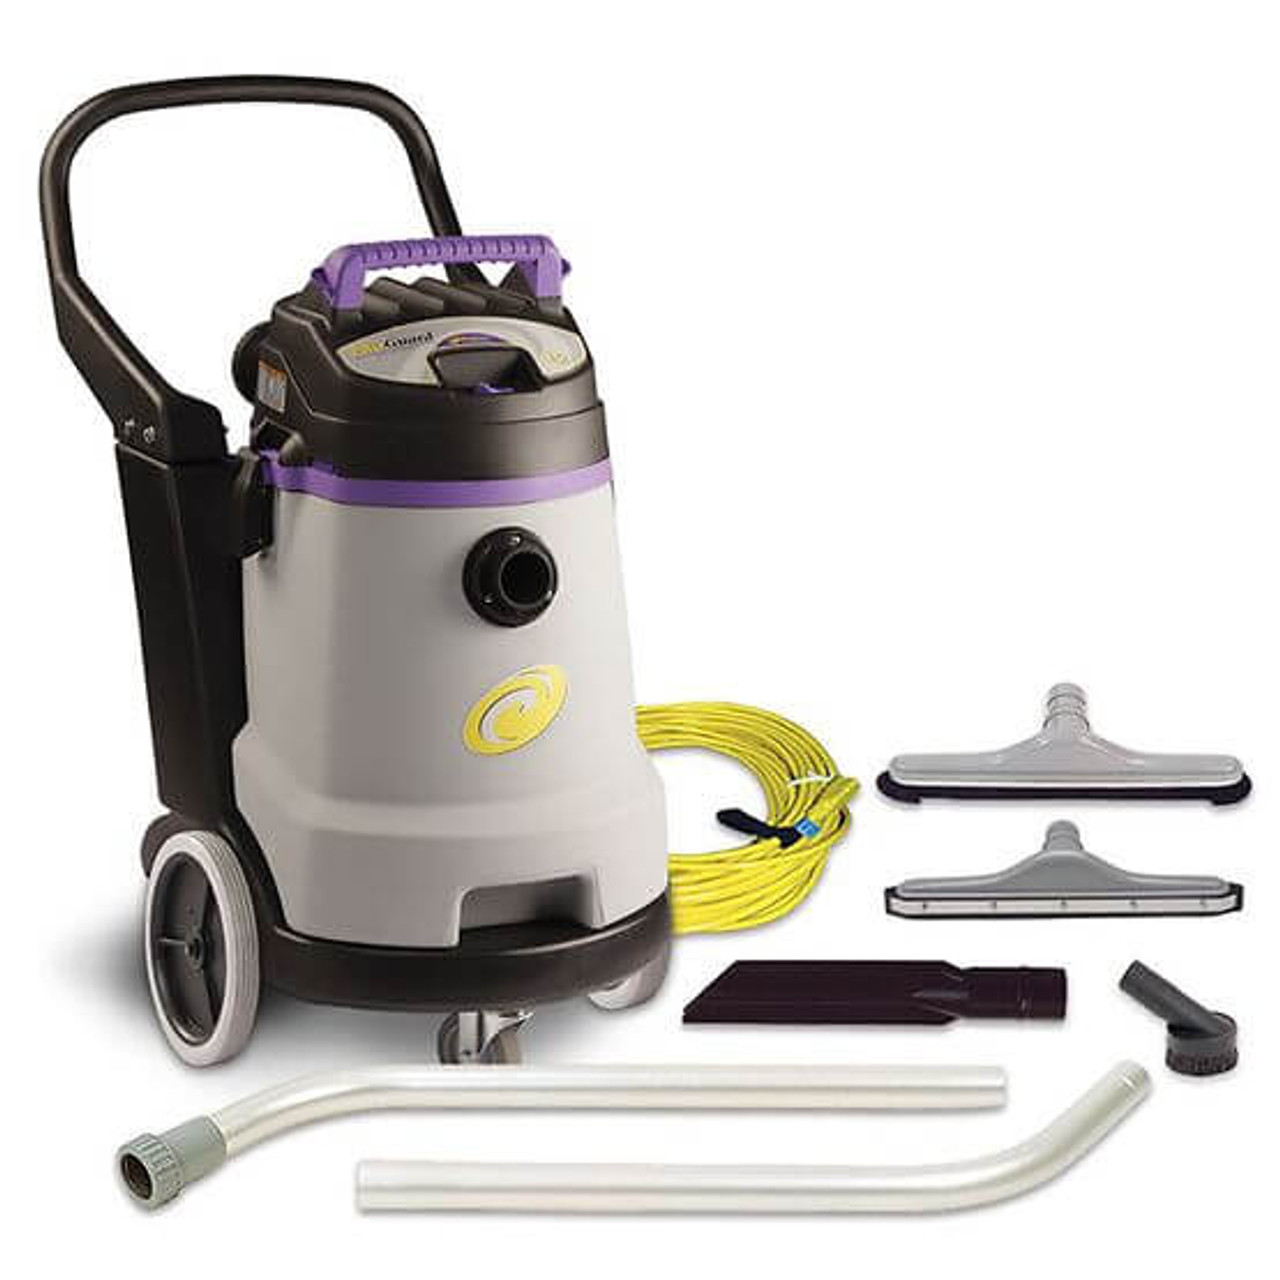 ProTeam 15 Gallon ProGuard 15 Wet/Dry Vacuum with Tool Kit - 120V